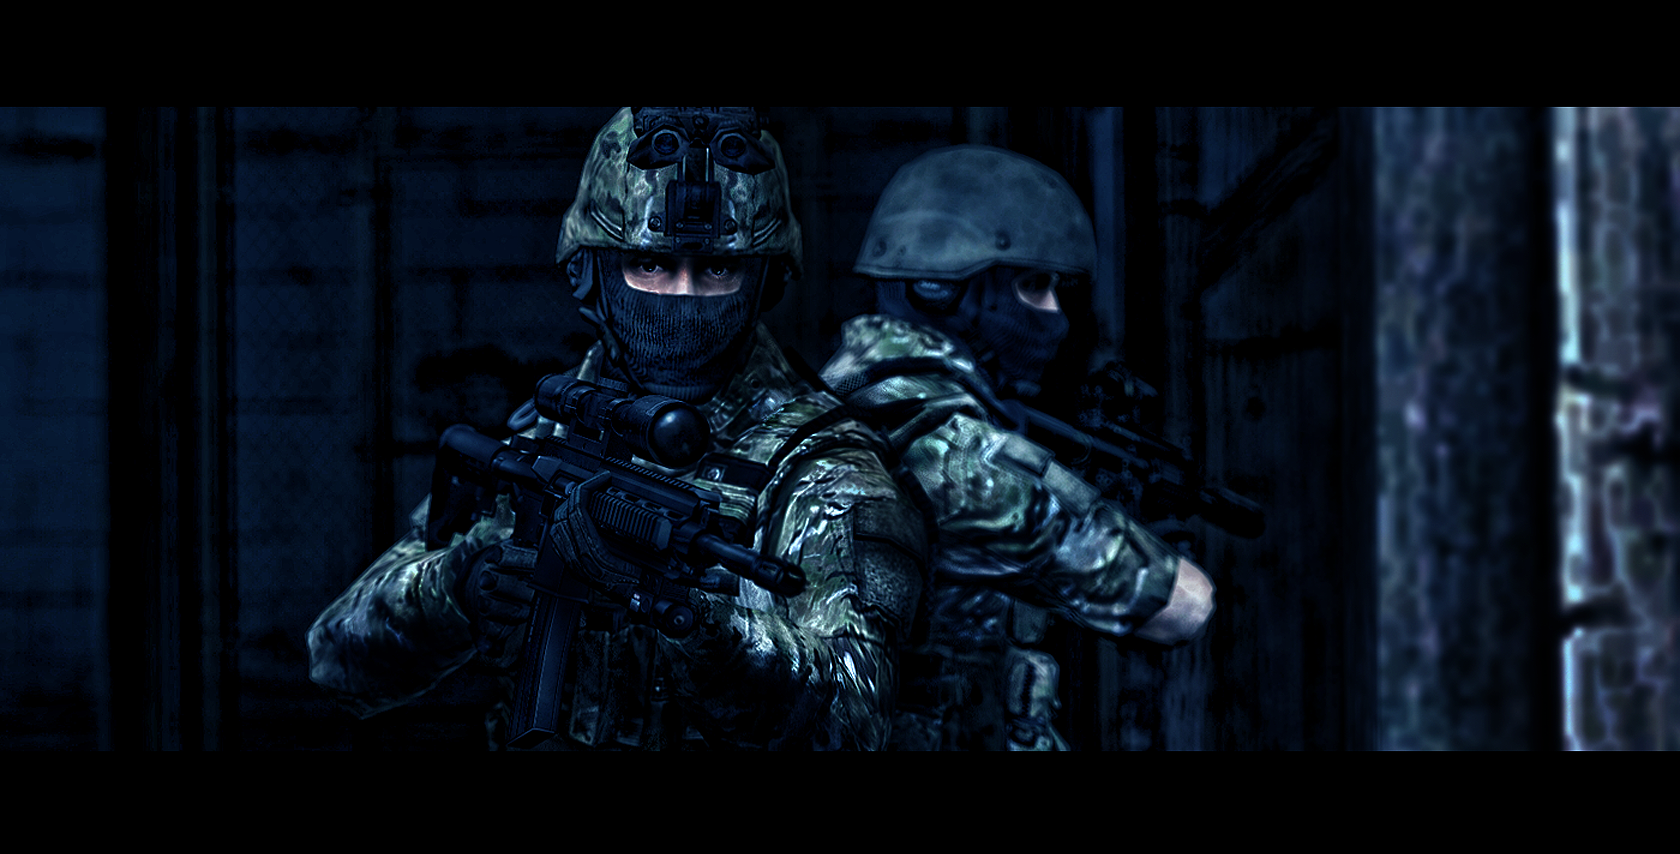 Special Forces 2 by arthuro12 on DeviantArt